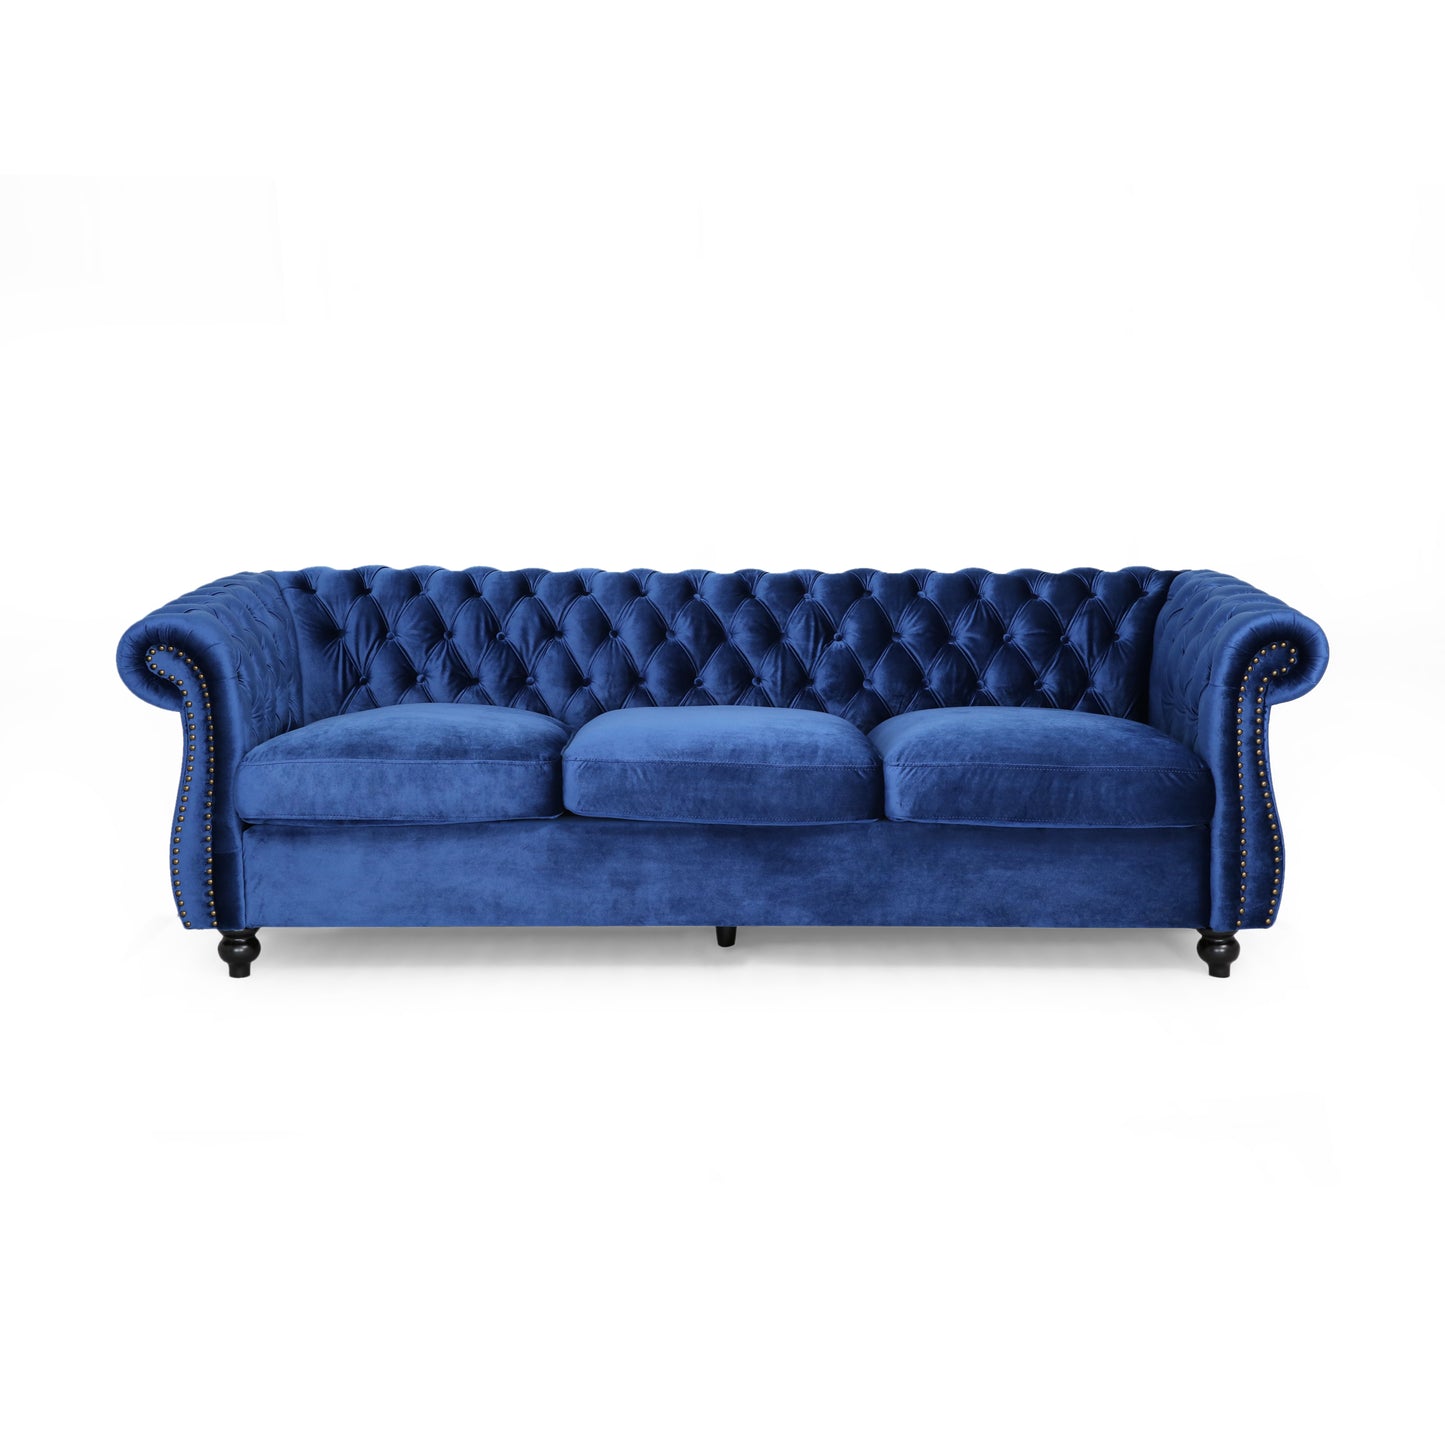 Vita Chesterfield Tufted Microfiber Sofa with Scroll Arms